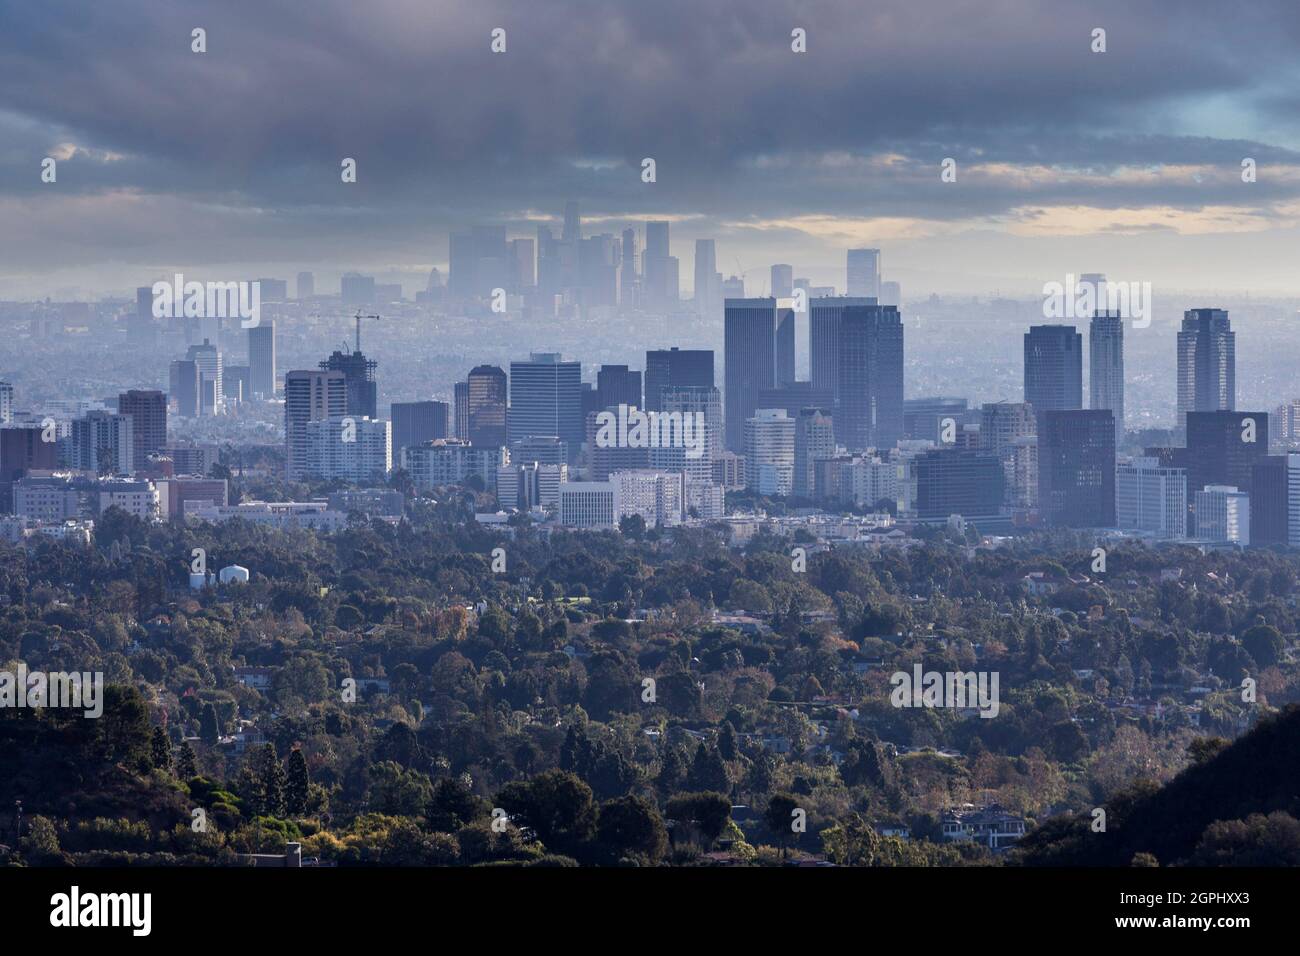 Stormy sky view of Century City with downtown Los Angeles in the background. Stock Photo